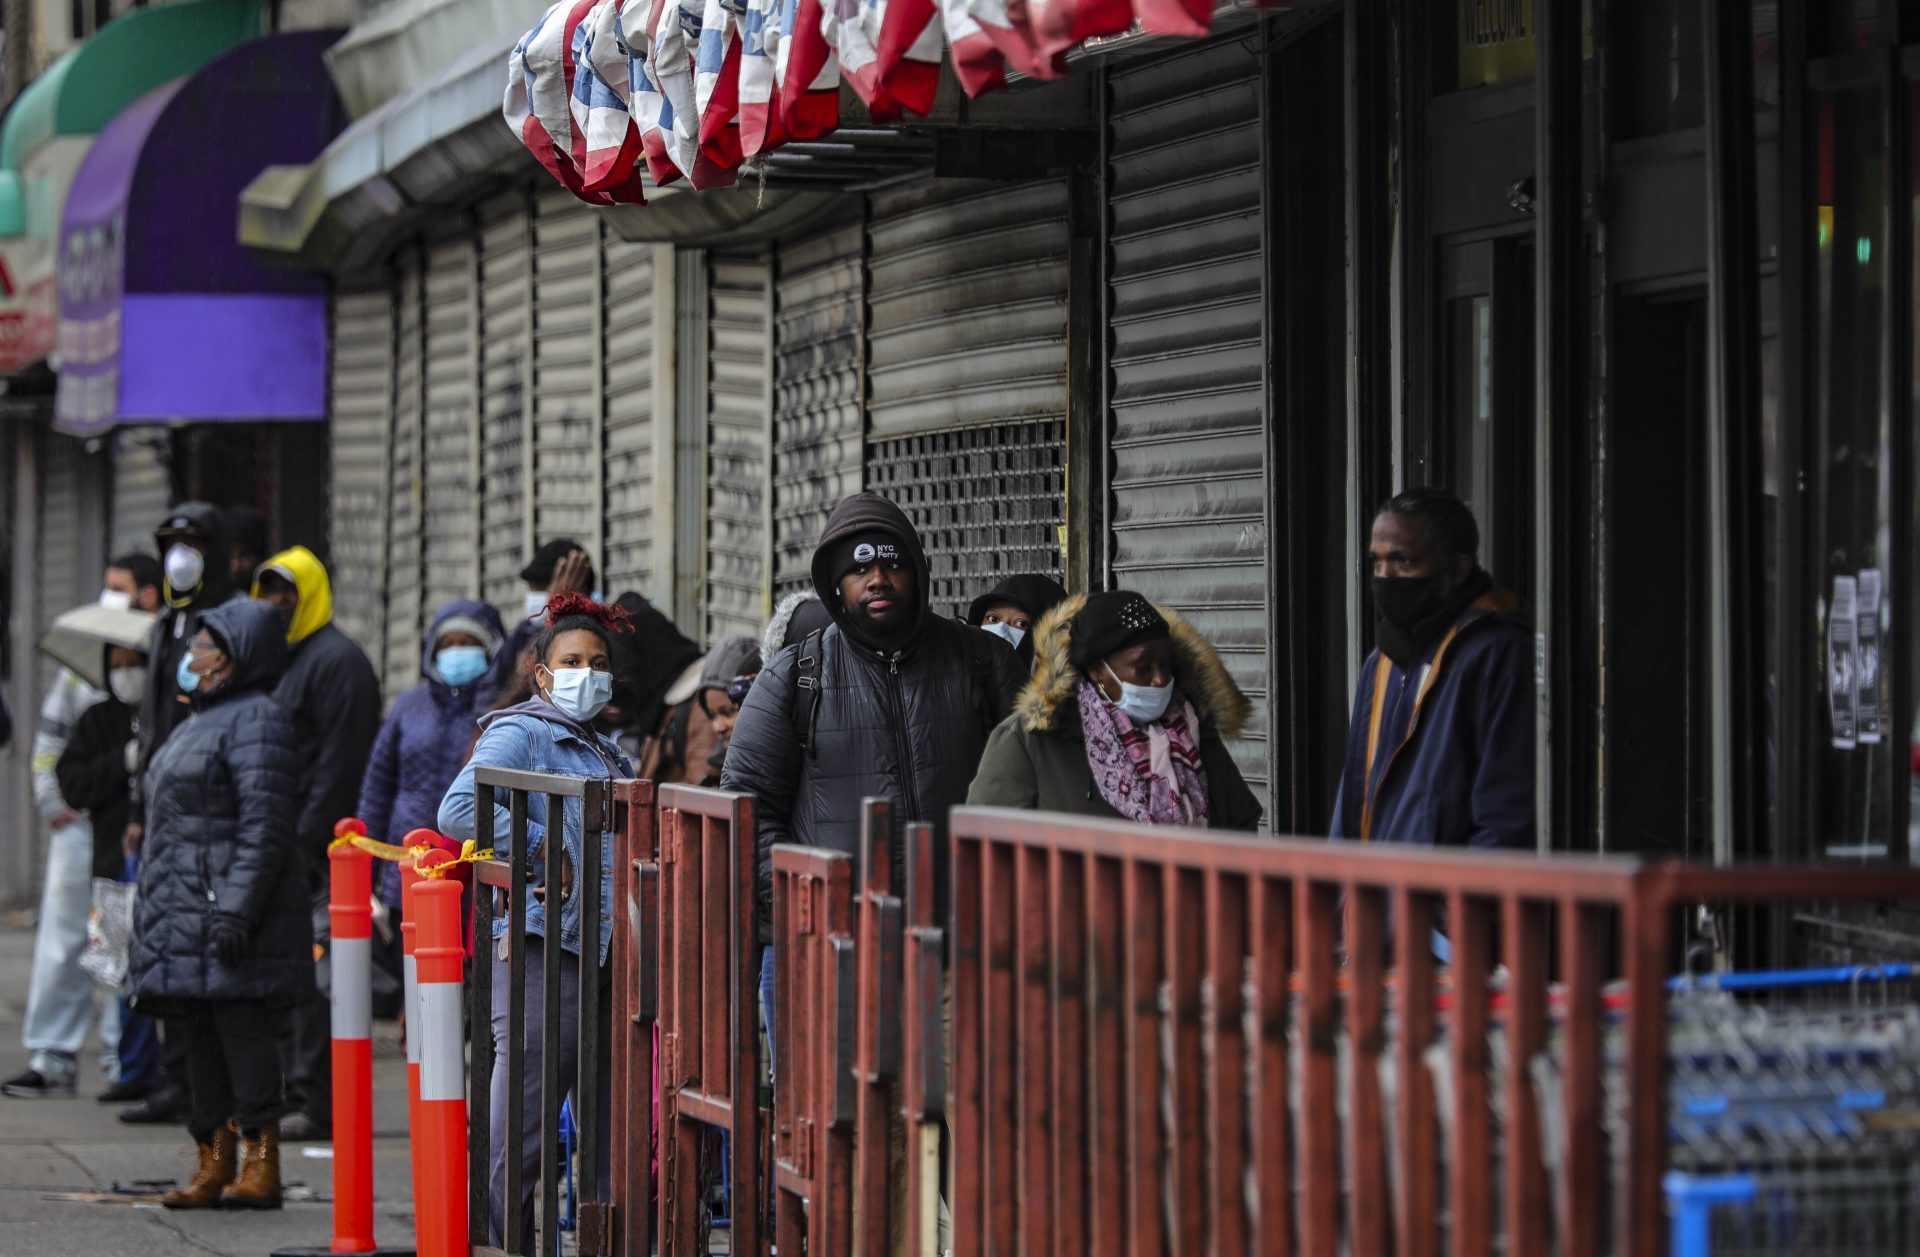 Customers in masks line up outside a grocery store on Flatbush Avenue, waiting to enter after other shoppers have left, because of social distancing efforts during the coronavirus outbreak, Friday April 3, 2020, in New York.